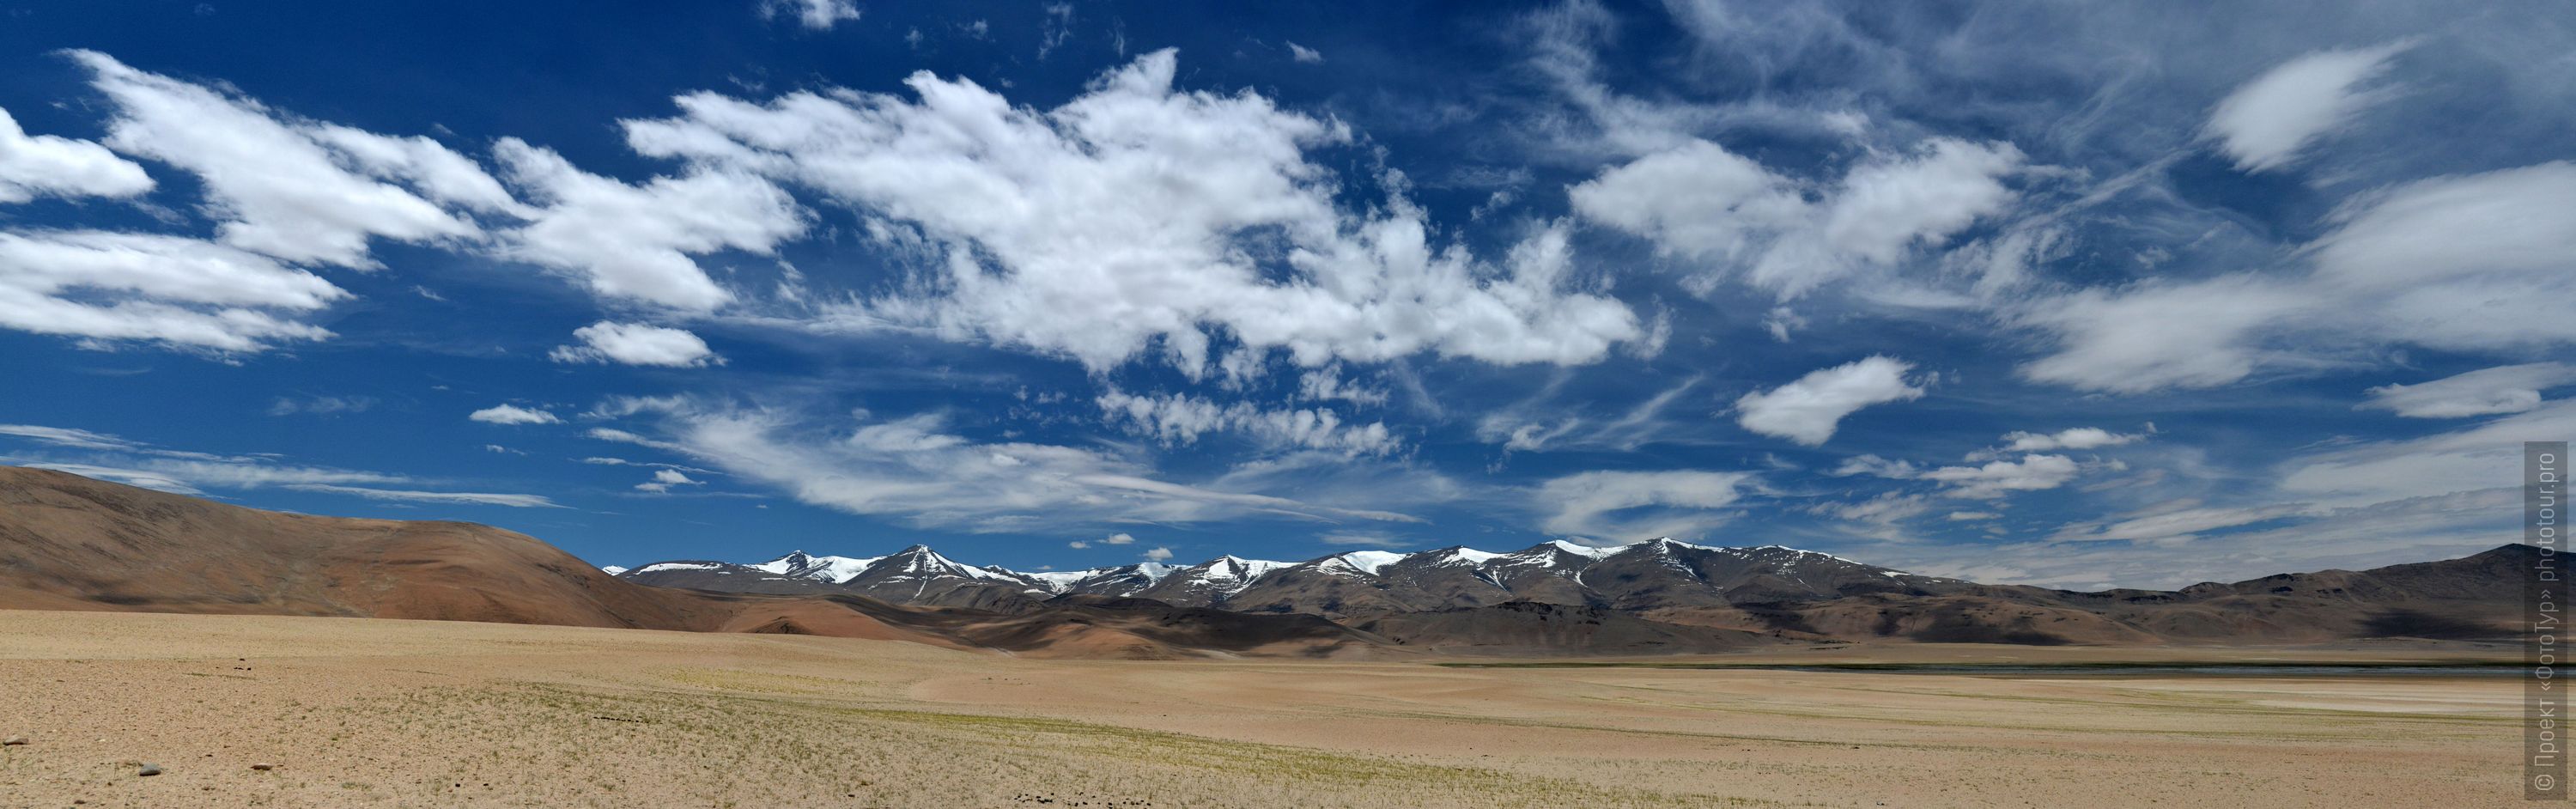 View of the Rupshu Valley from the Taglung La Pass, Ladakh. Tour Tibet Lakeside Advertising: Alpine lakes, geyser valley, Lamayuru, Colored Mountains, 01 - 10.09. 2022 year.